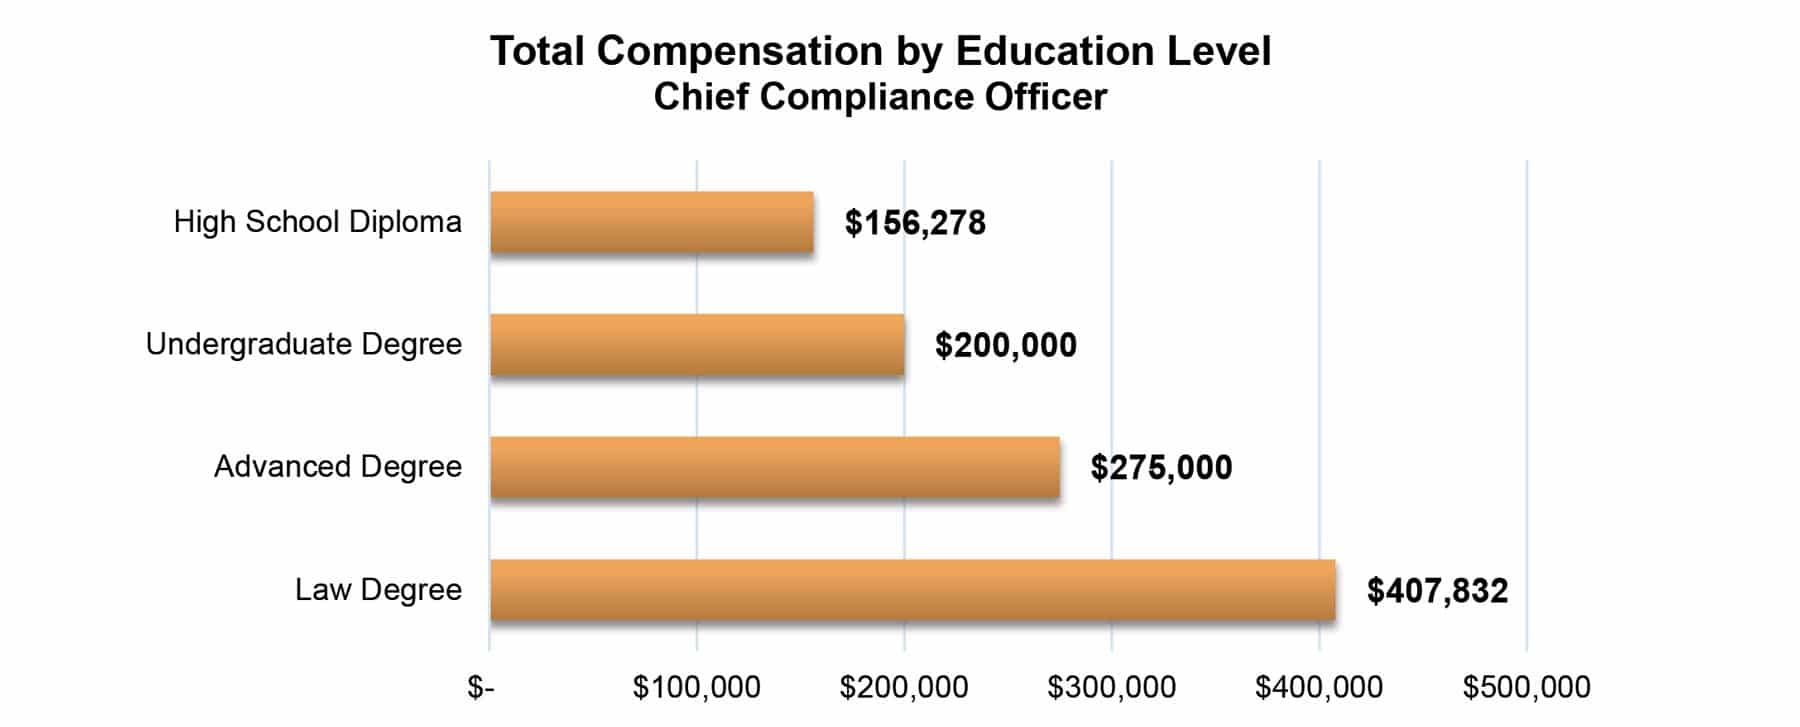 Total Compensation by Education Level Chief Compliance Officer